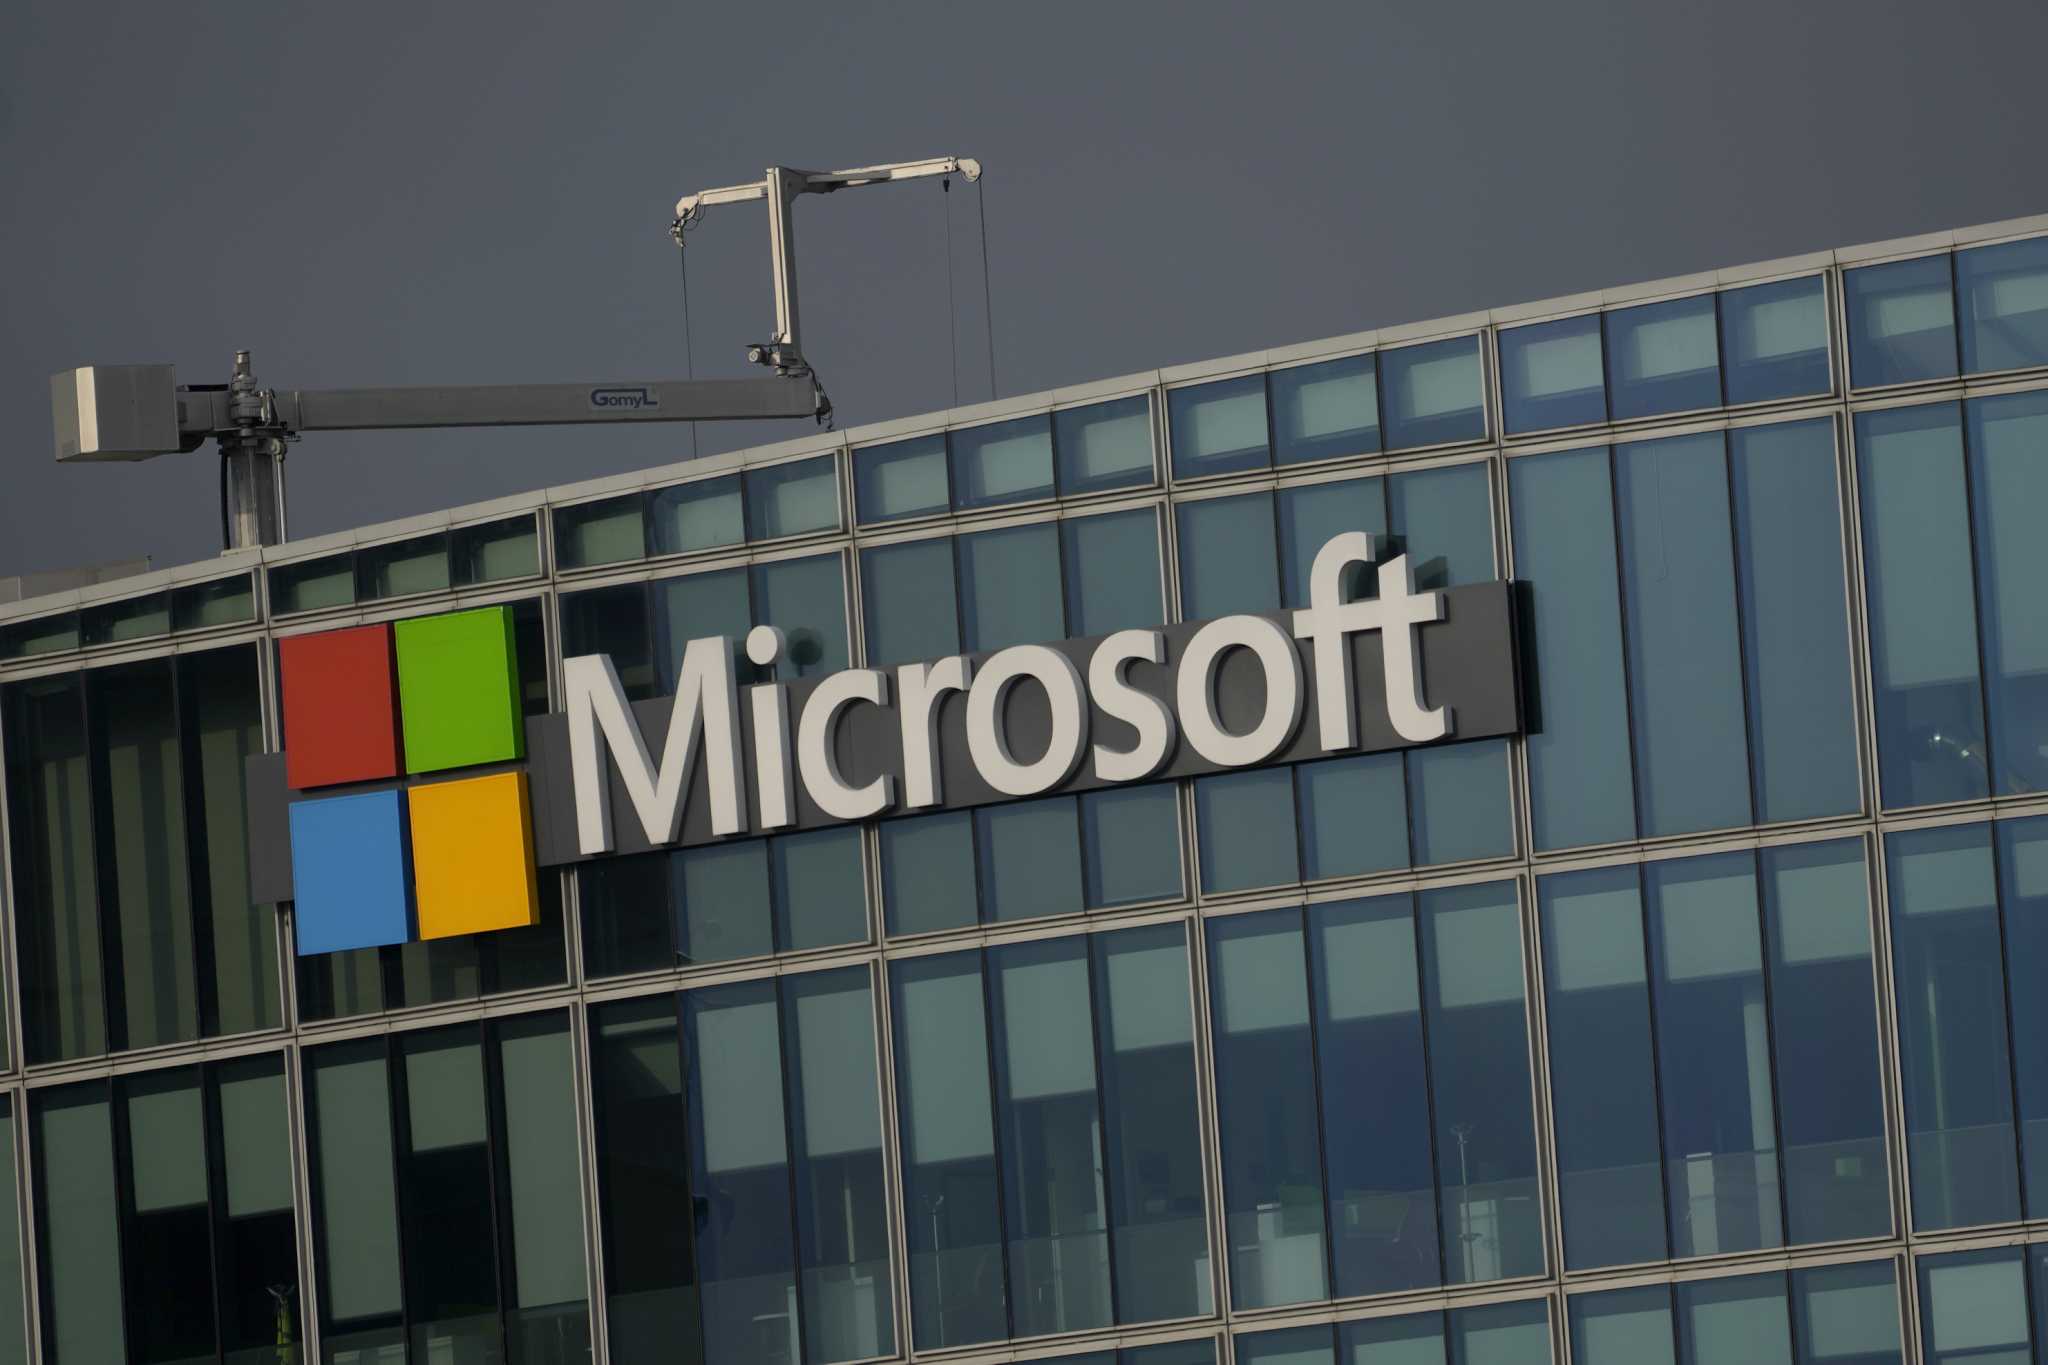 Microsoft breached antitrust rules by bundling Teams with office software, European Union says